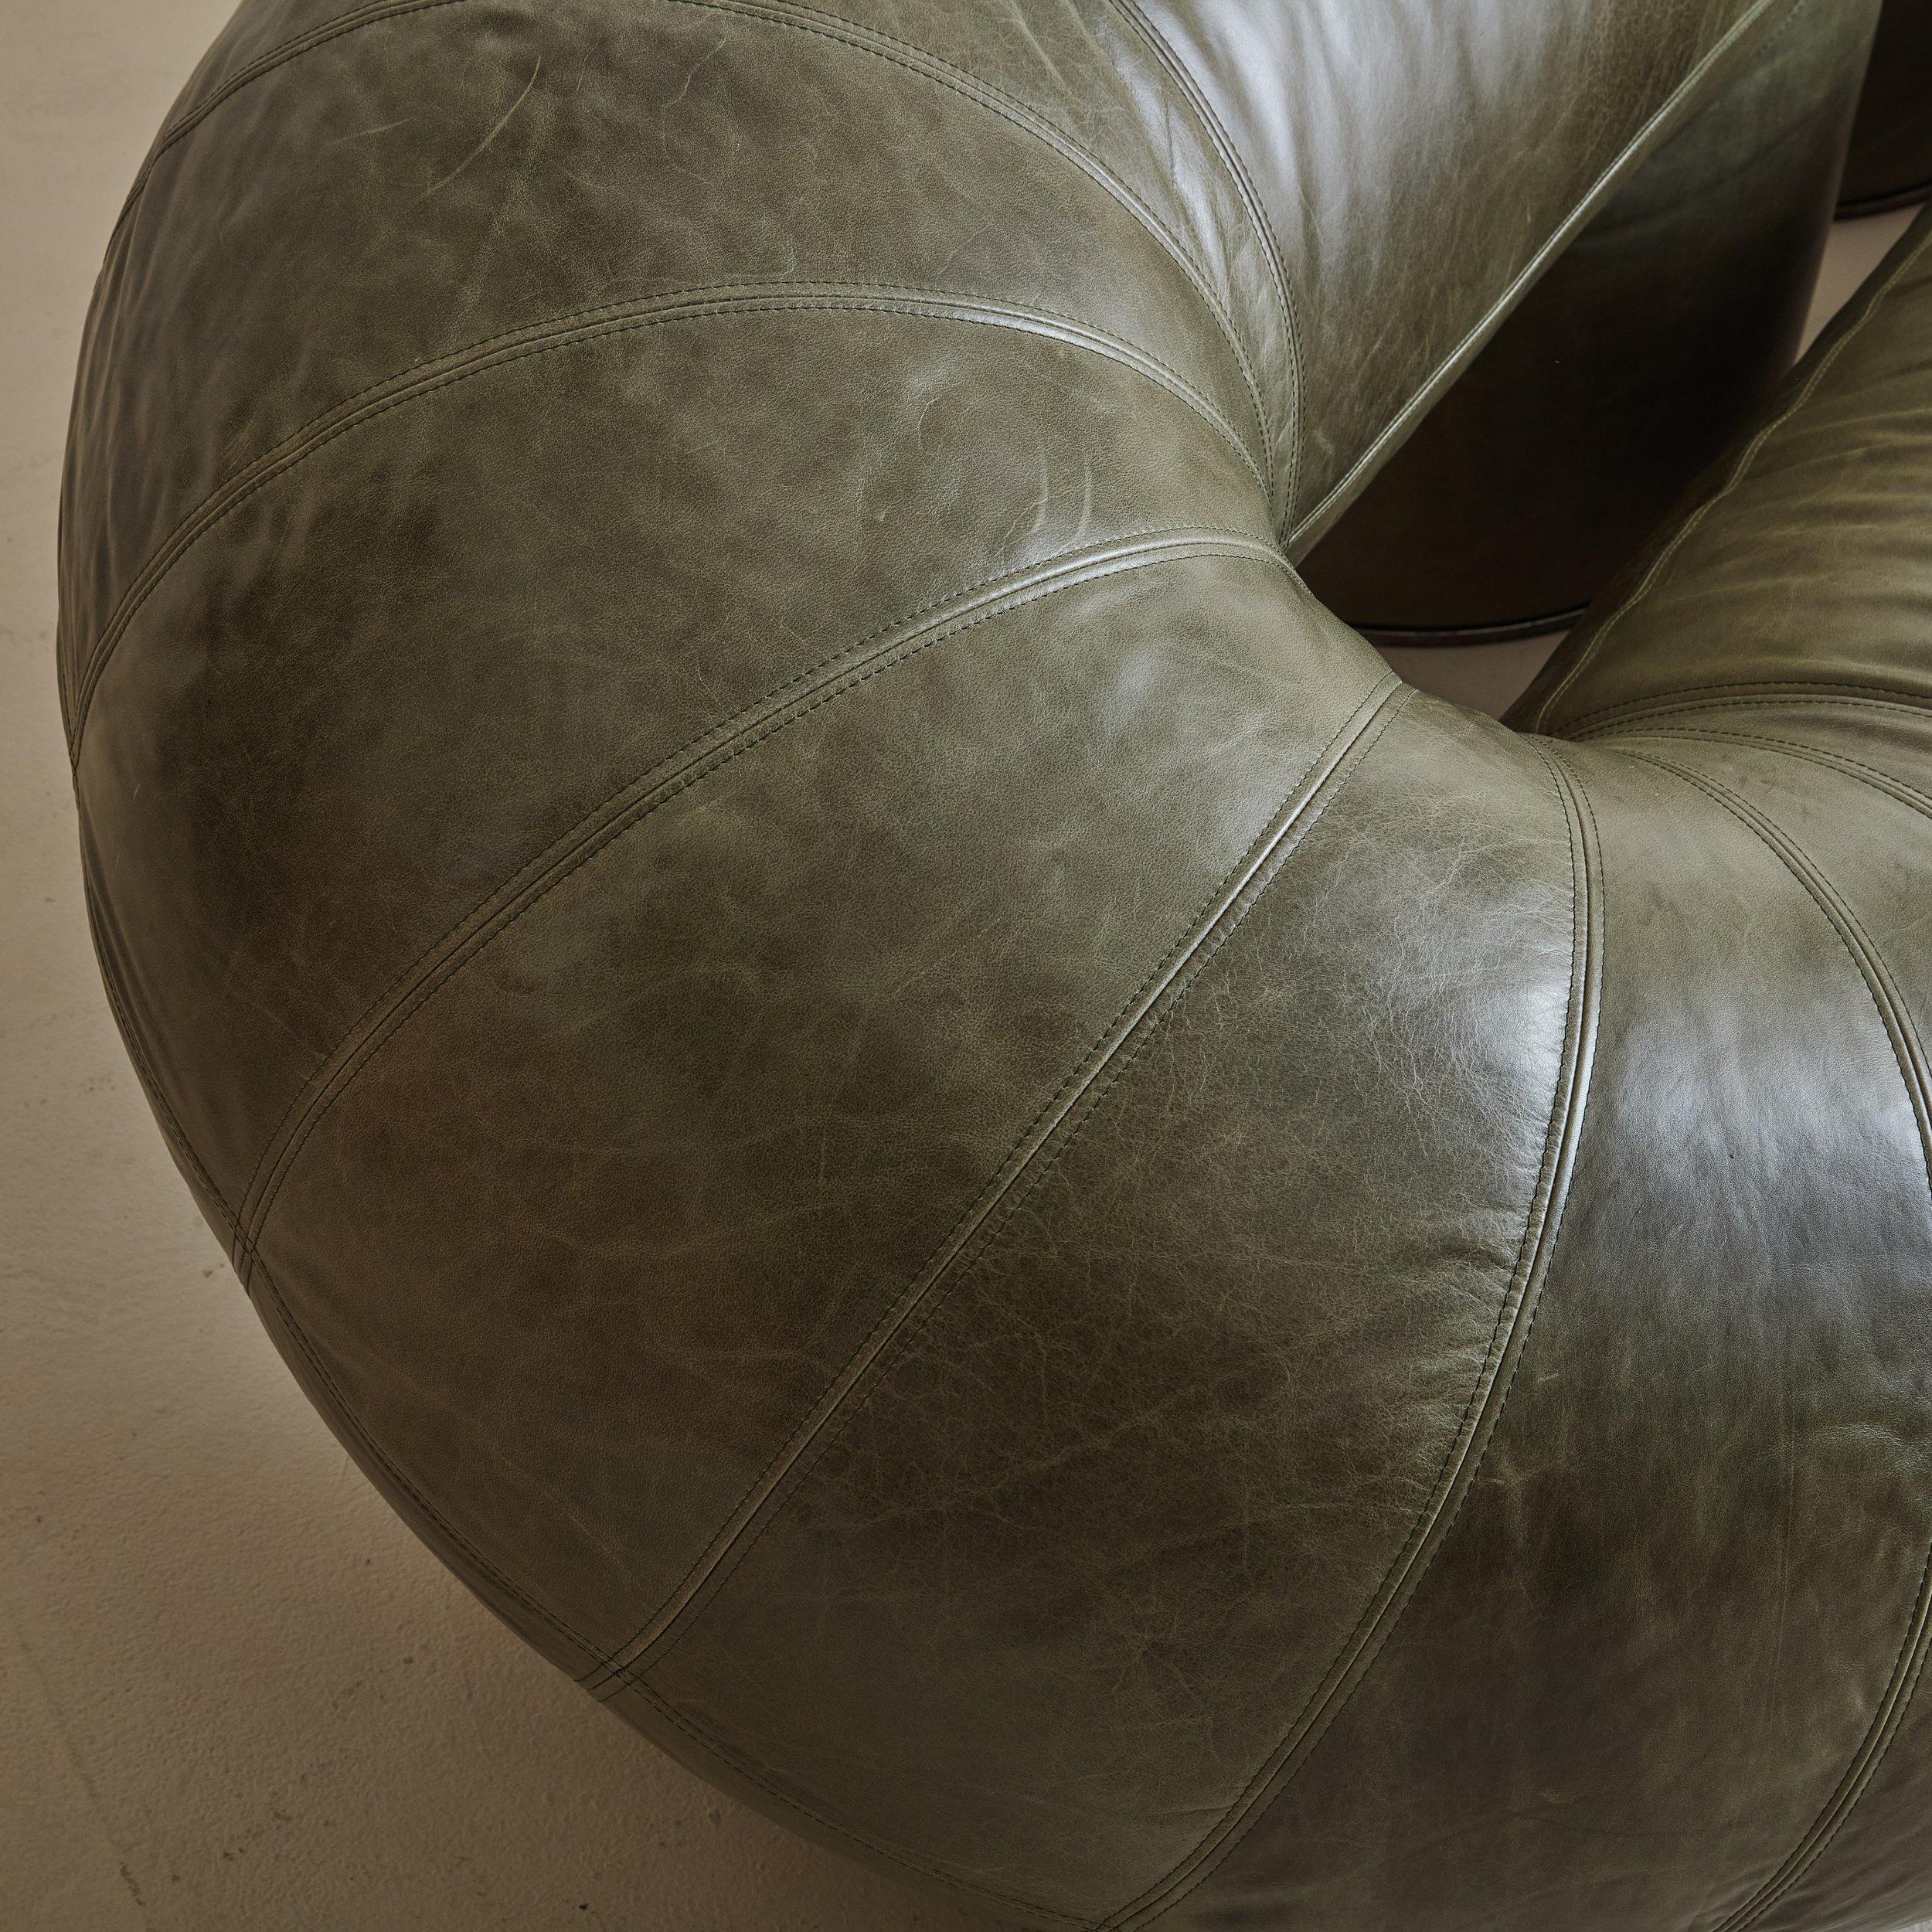 Space Age 'Zeppelin' Sofa in Olive Green Leather by Walter Leeman for Velda For Sale 4